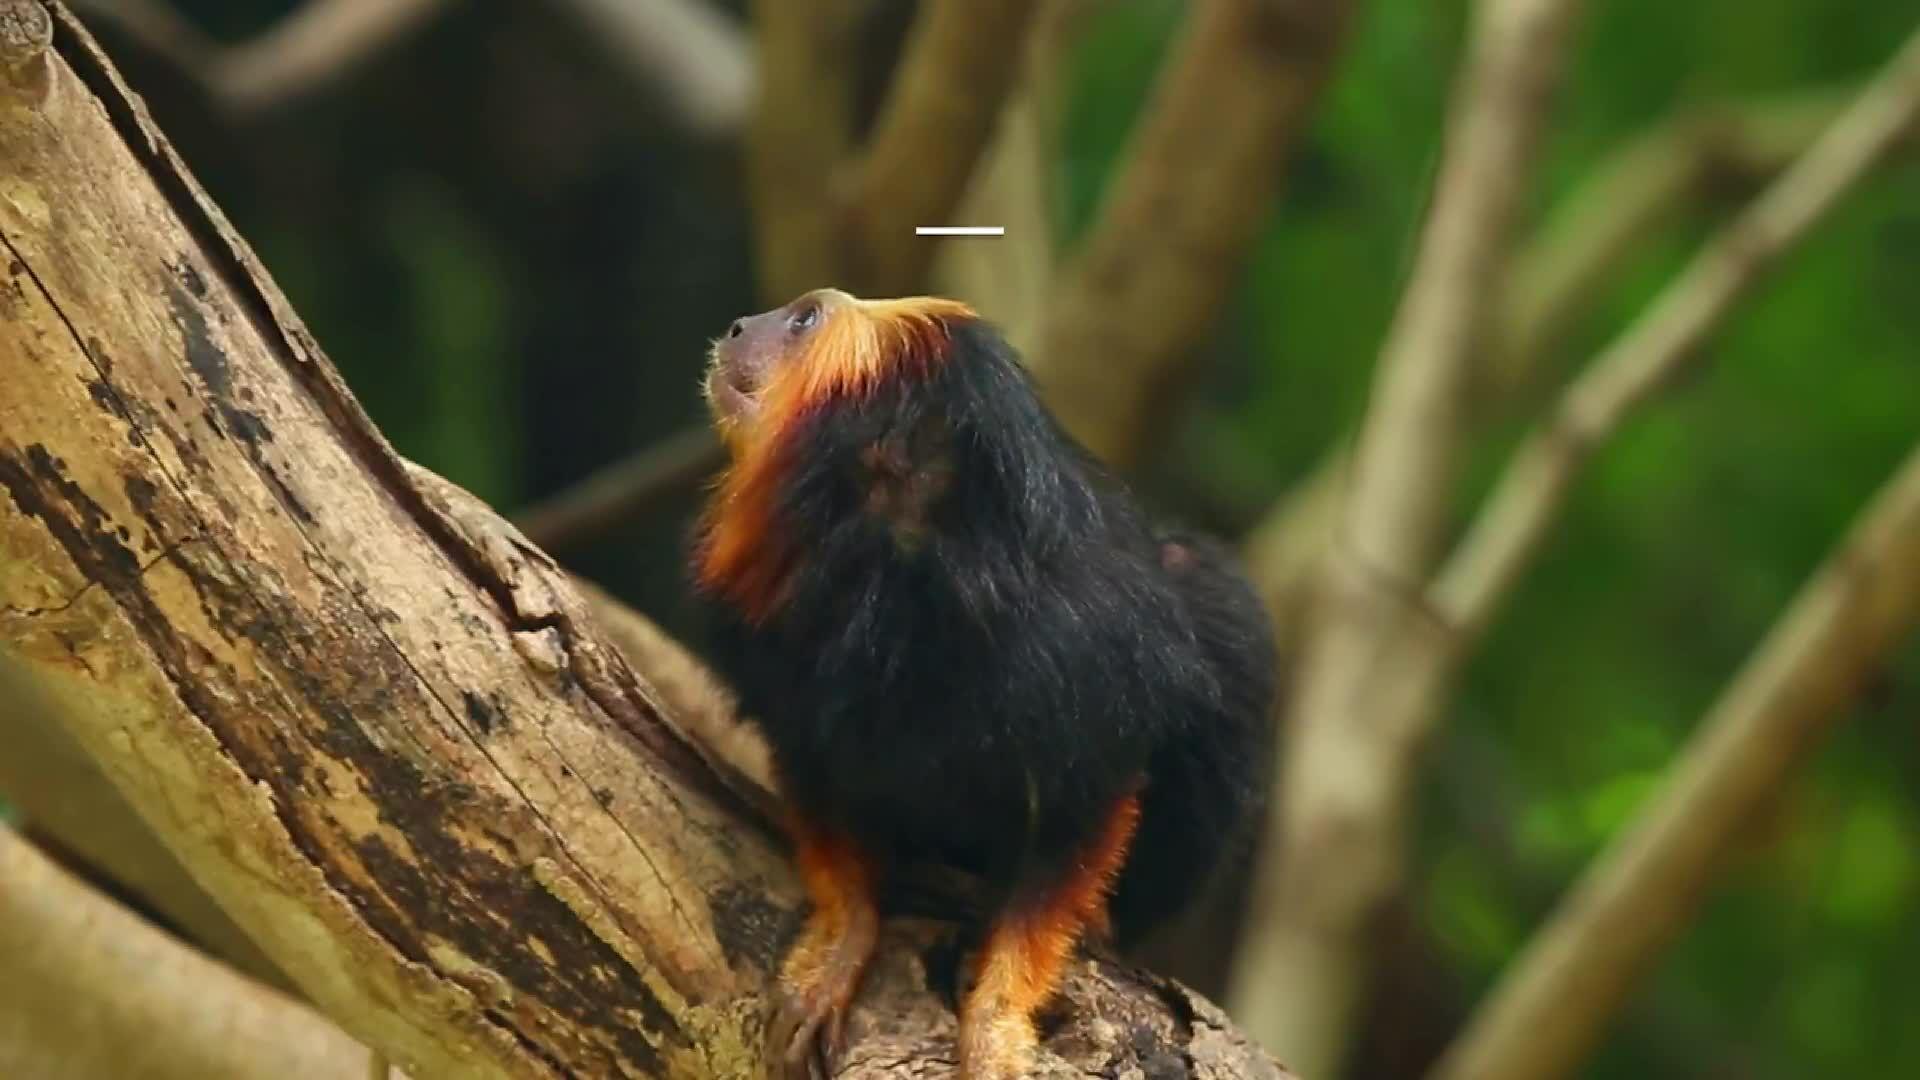 RWP ZOO WELCOMES A NEW GOLDEN LION TAMARIN BABY